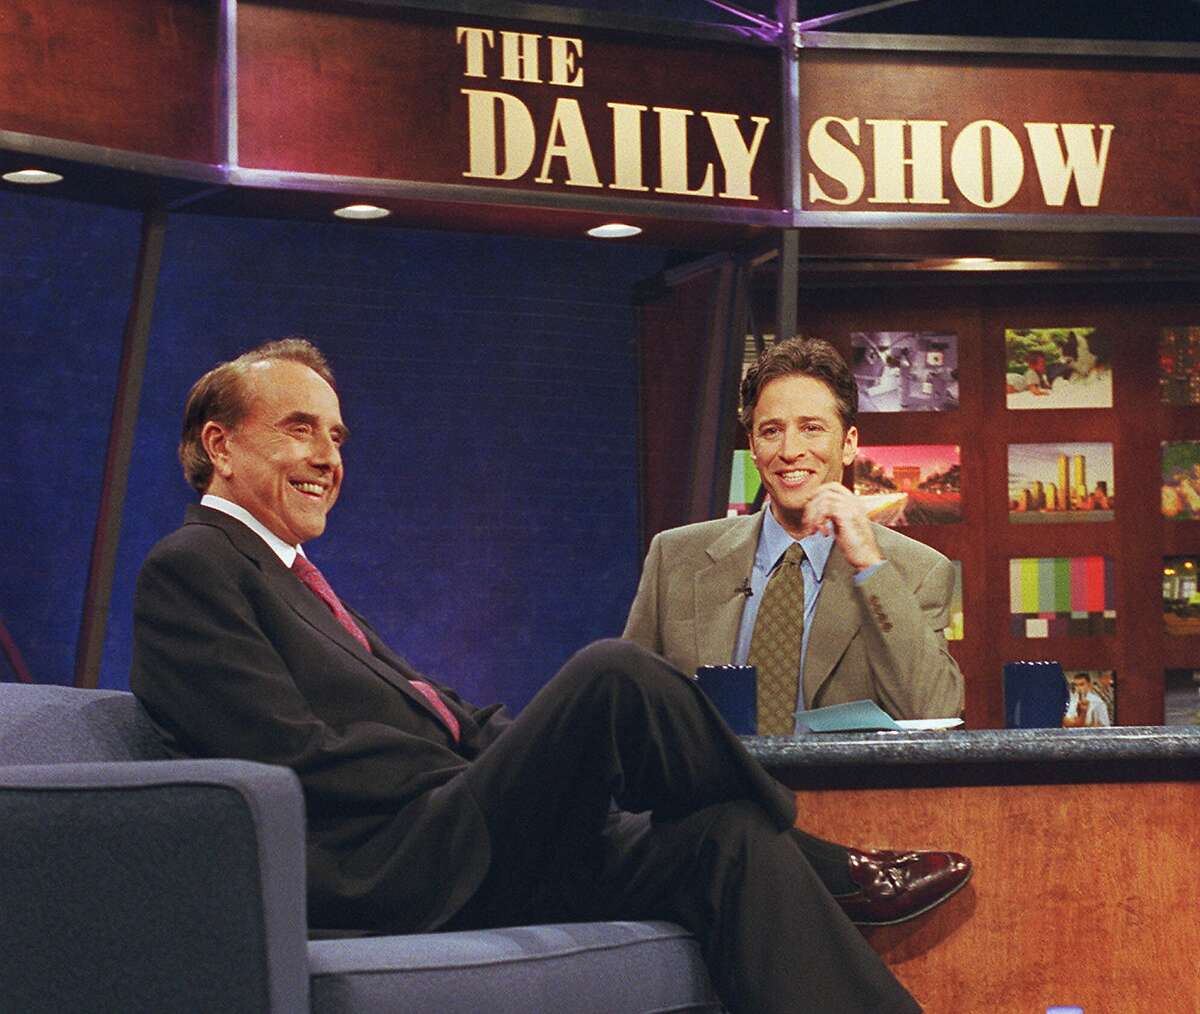 ** FILE **Jon Stewart, host of "The Daily Show," interviews Sen. Bob Dole on the set of the comedy show in New York, in this Dec. 7, 1999, file photo. CNN has signed Stewart of Comedy Central to make a weekly version of his satirical news program to air late at night. (AP Photo/Comedy Central, Al Levine/FILE)